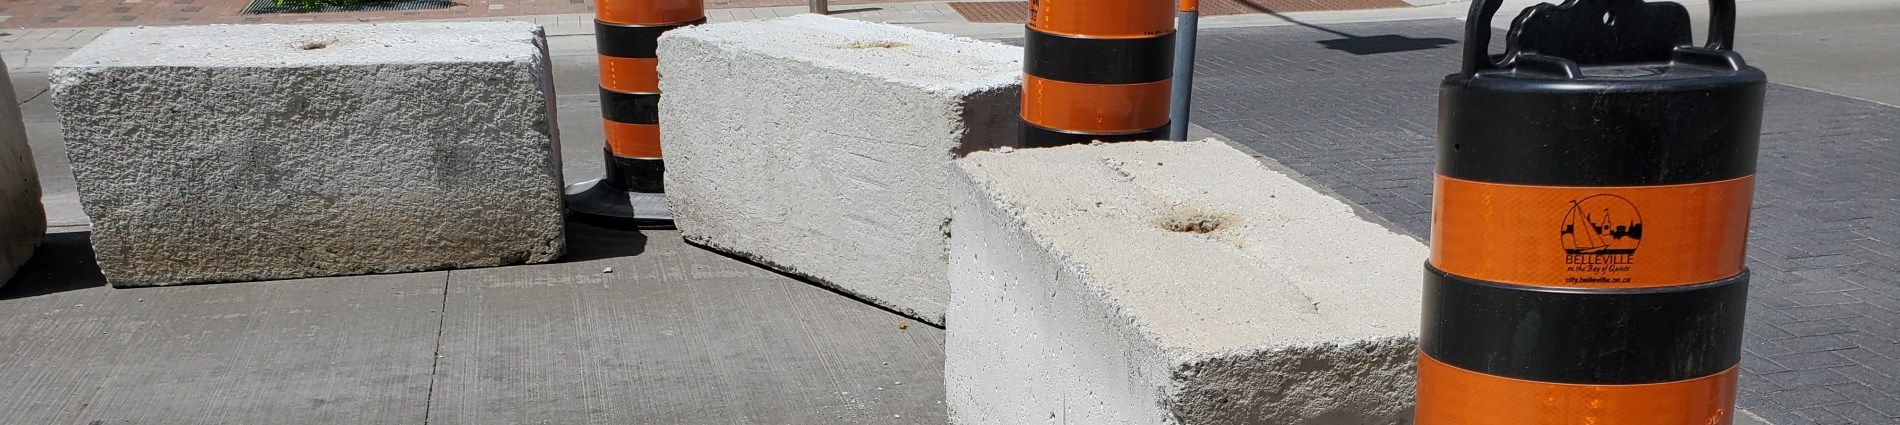 photo of road barriers and cones